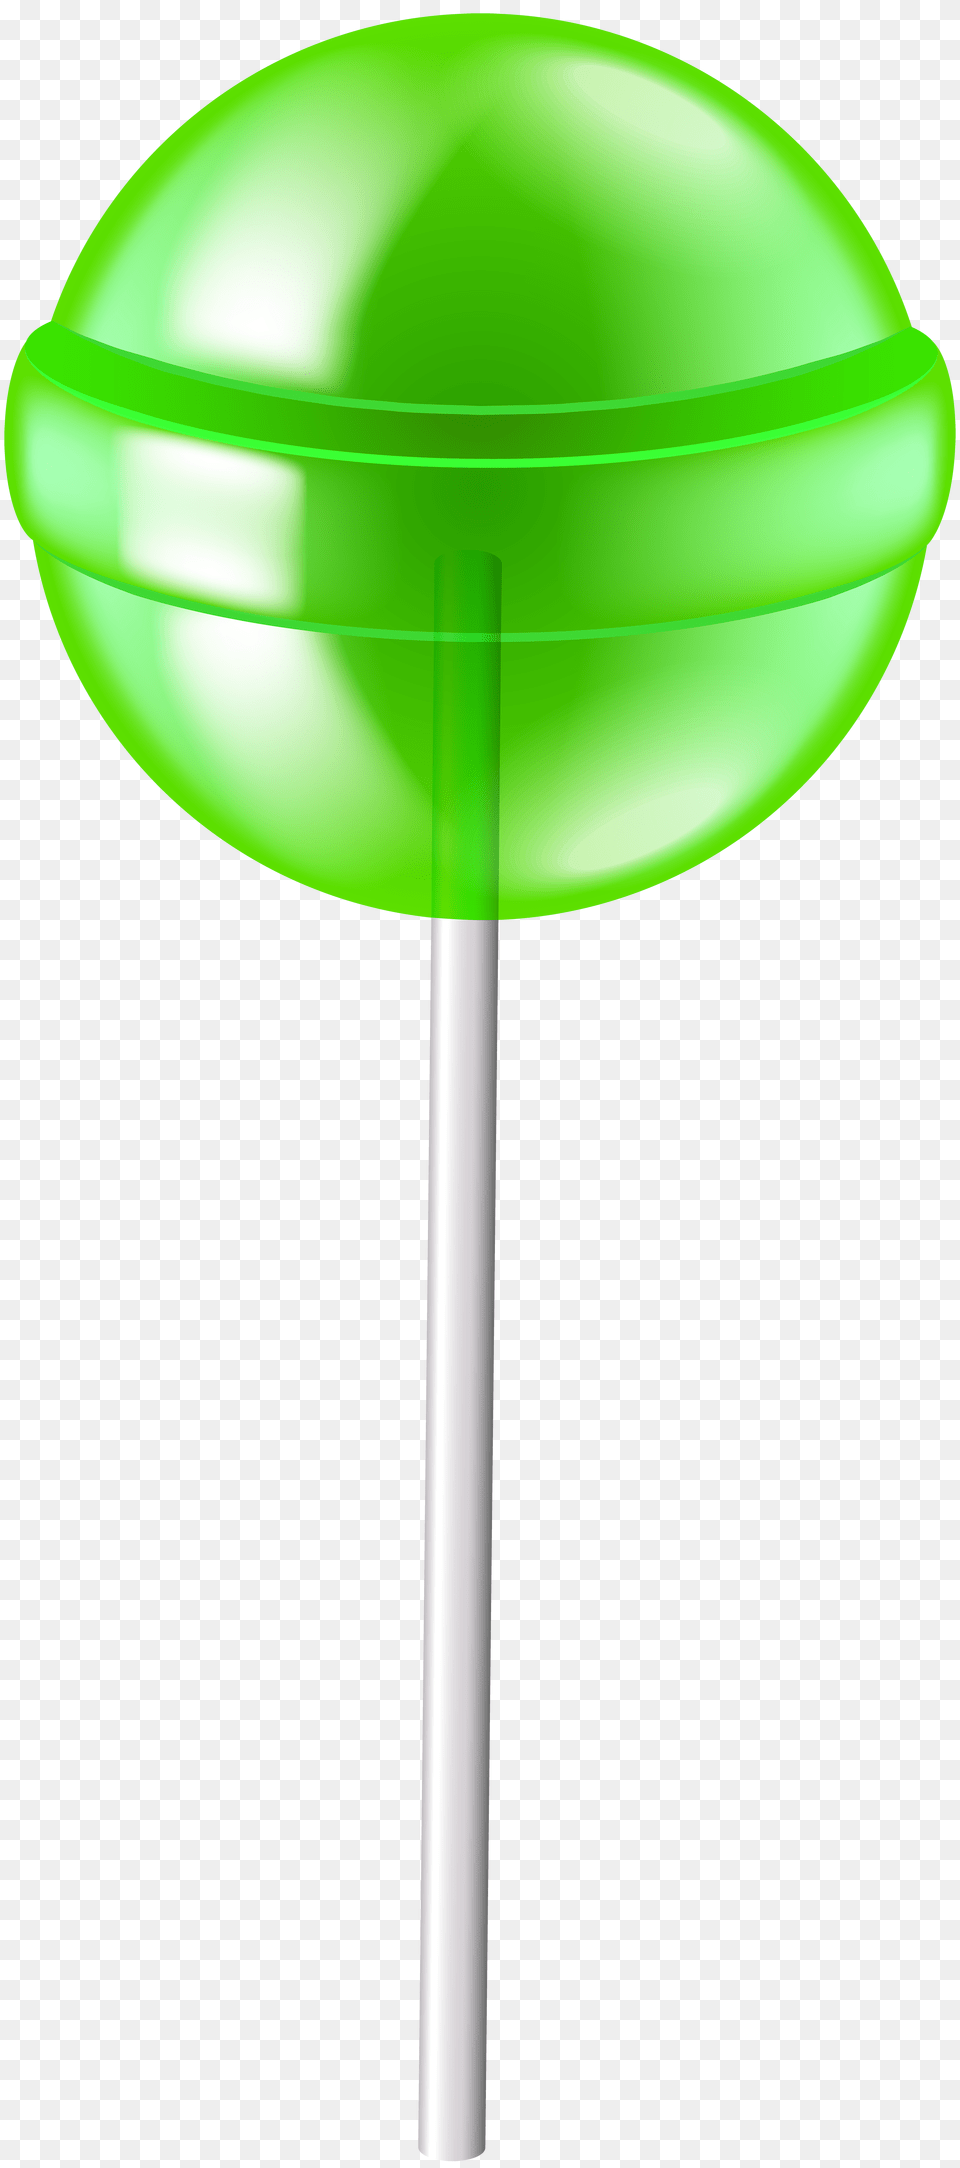 Green Lollipop Clip, Candy, Food, Sweets Png